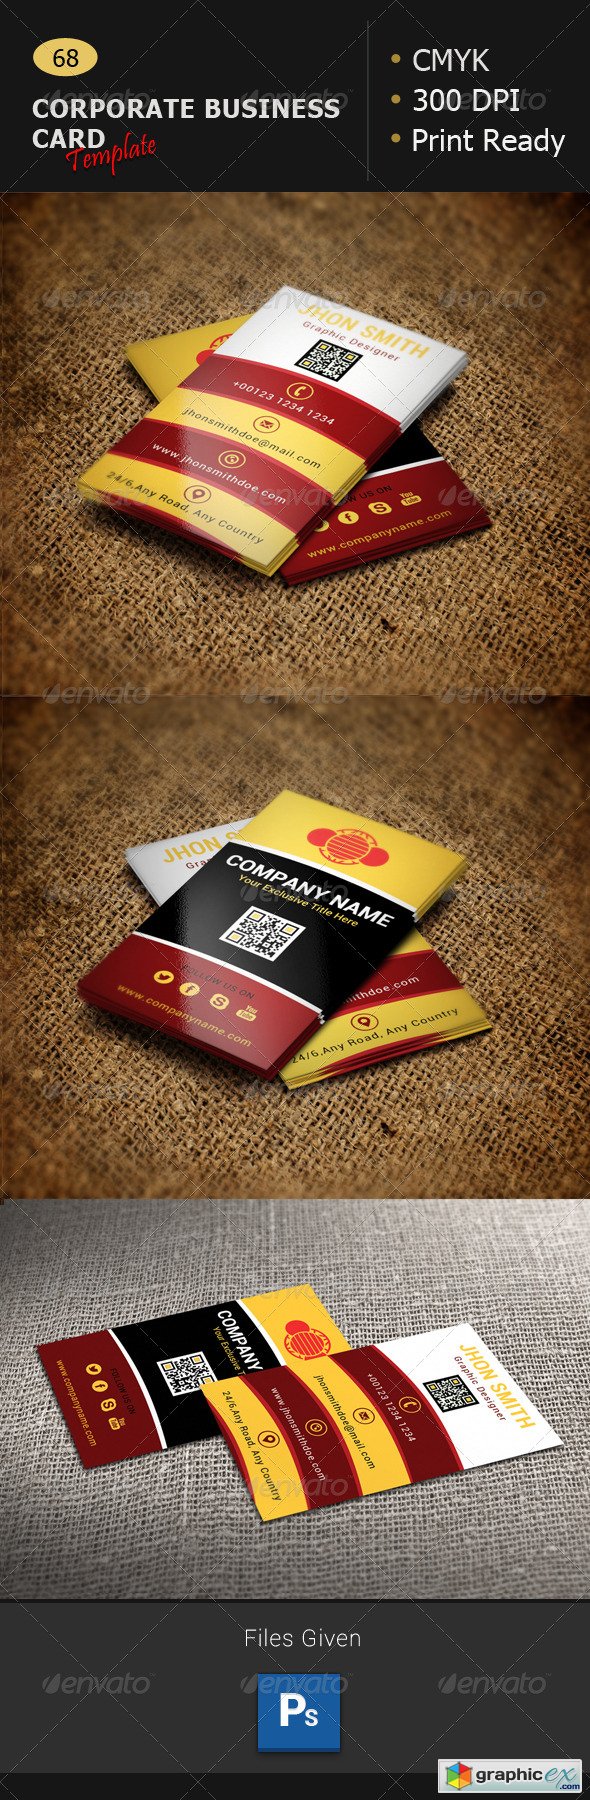 Business Card Template 68